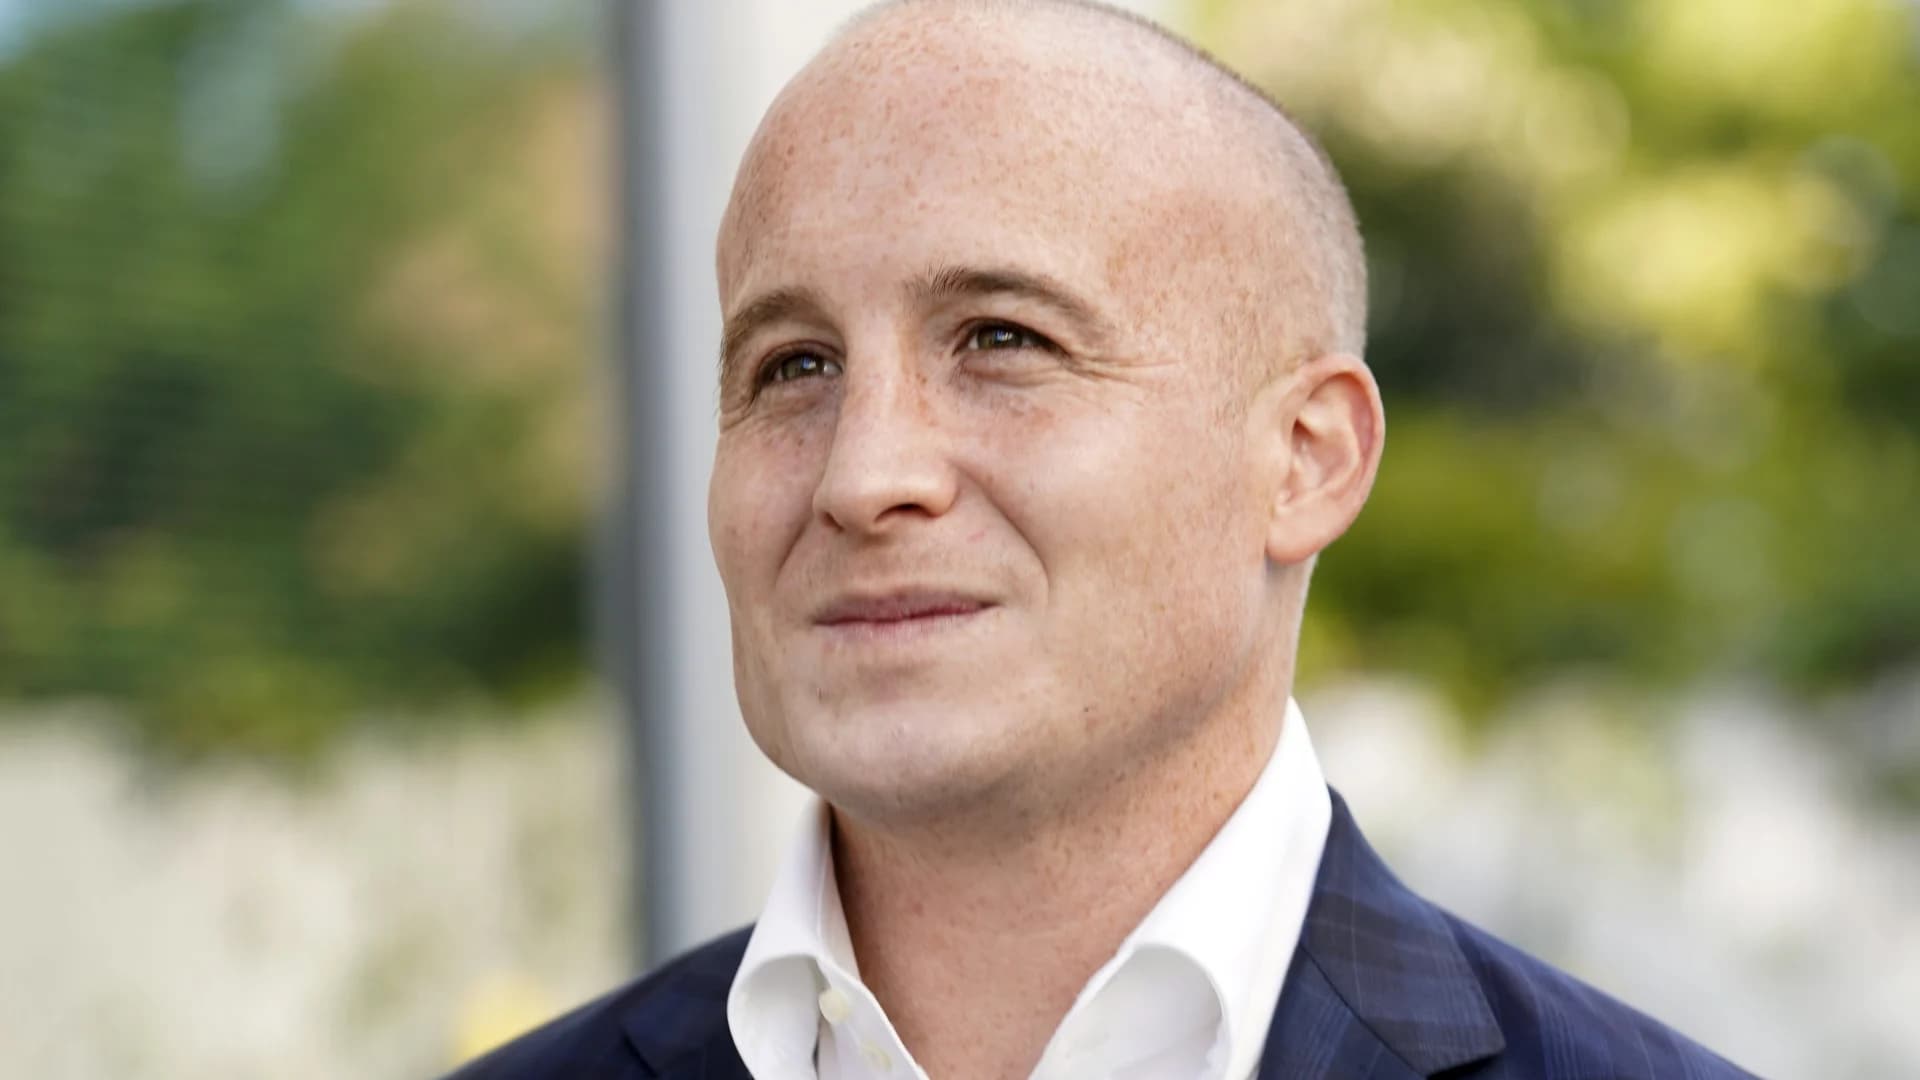 Rep. Max Rose exploring campaign for NYC mayor